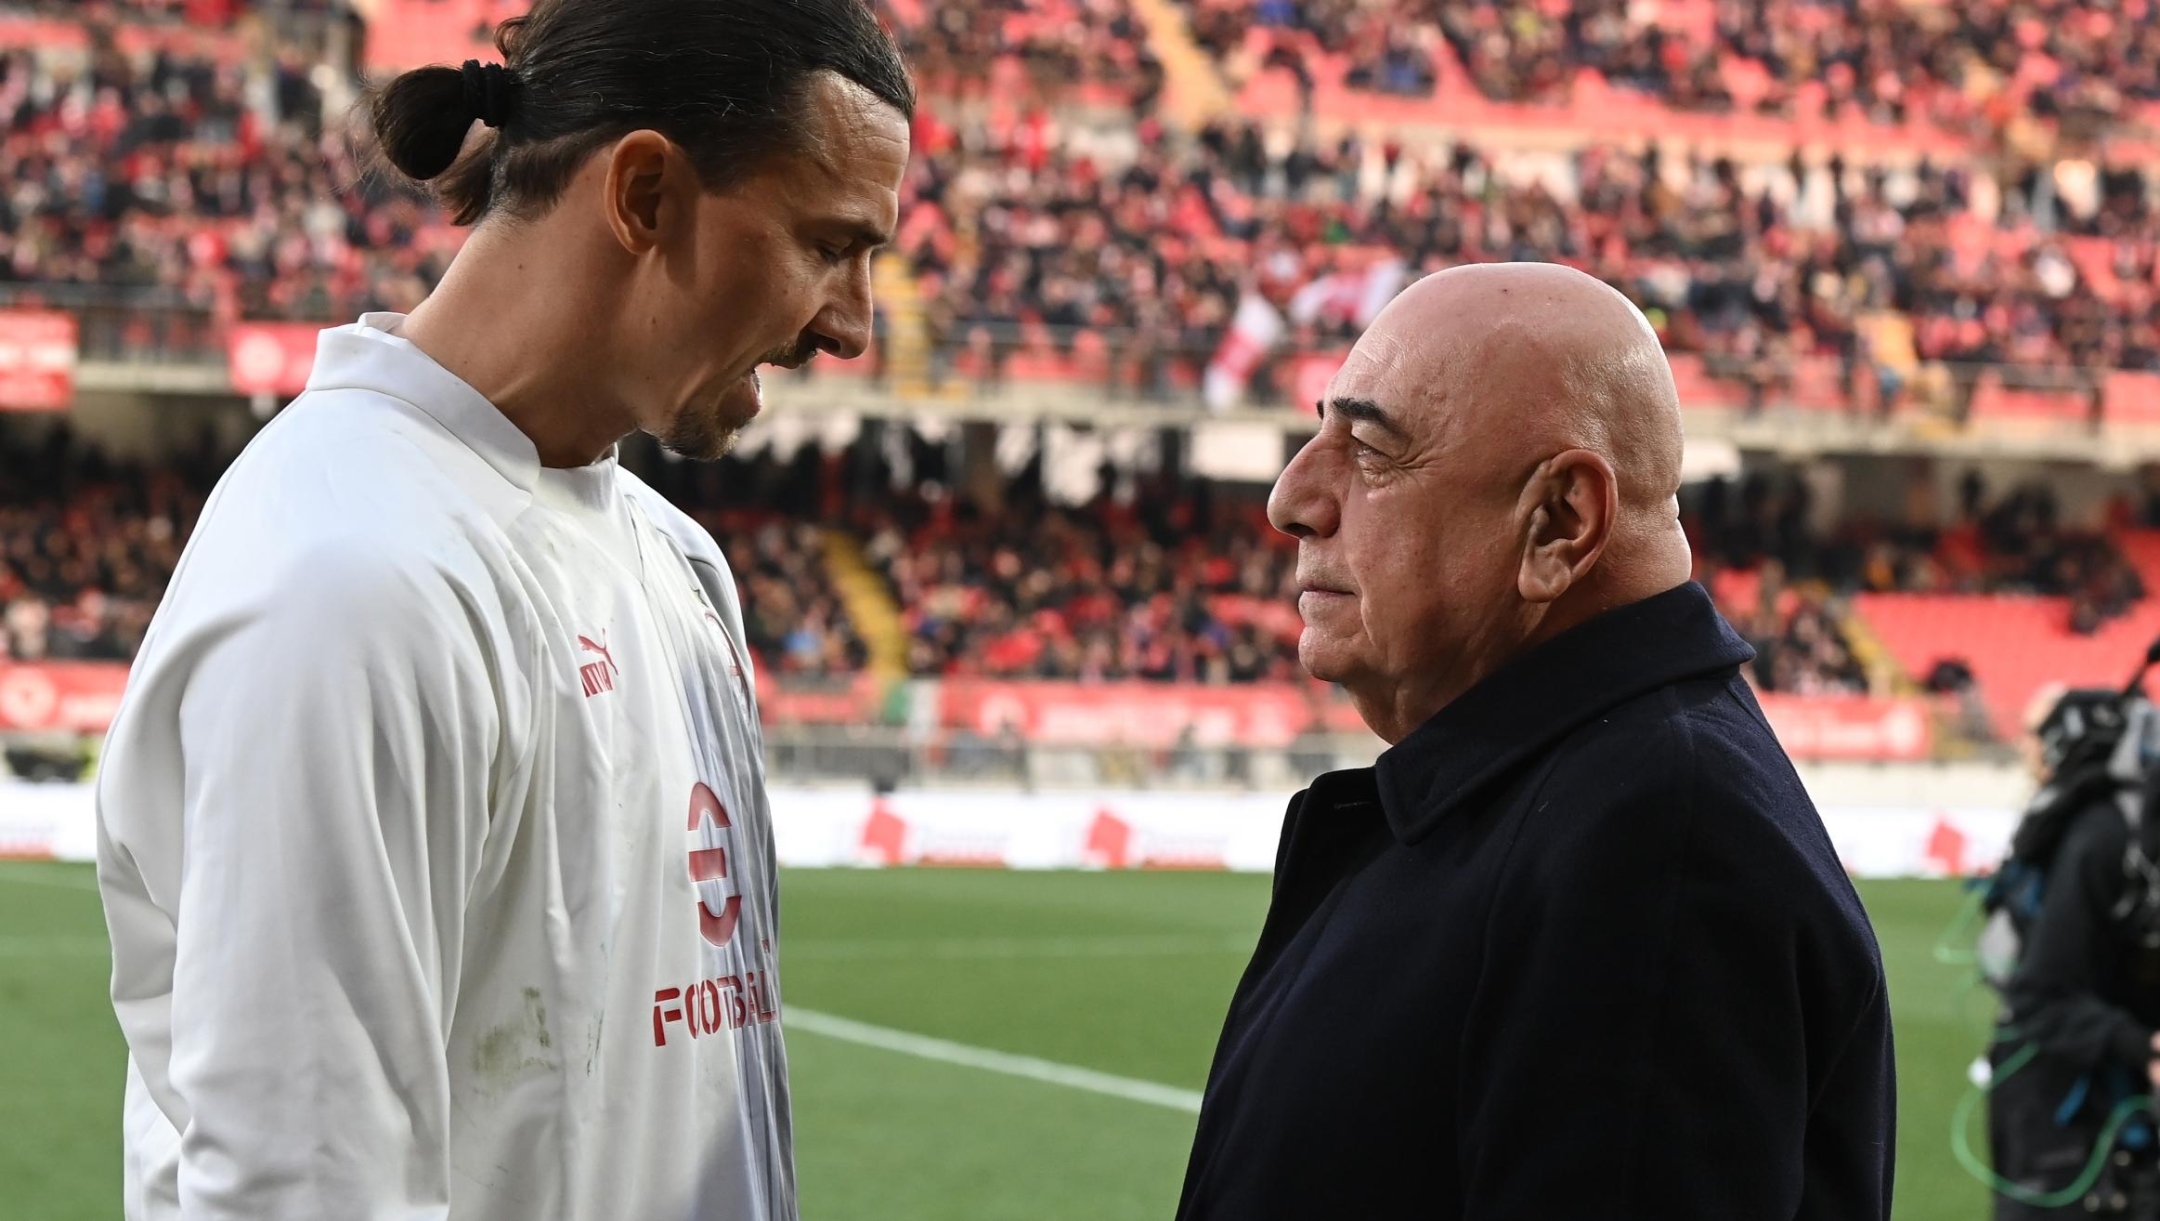 MONZA, ITALY - FEBRUARY 18:  Zlatan Ibrahimovic of AC Milan and Adriano Galliani before the Serie A match between AC Monza and AC Milan at Stadio Brianteo on February 18, 2023 in Monza, Italy. (Photo by Claudio Villa/AC Milan via Getty Images)